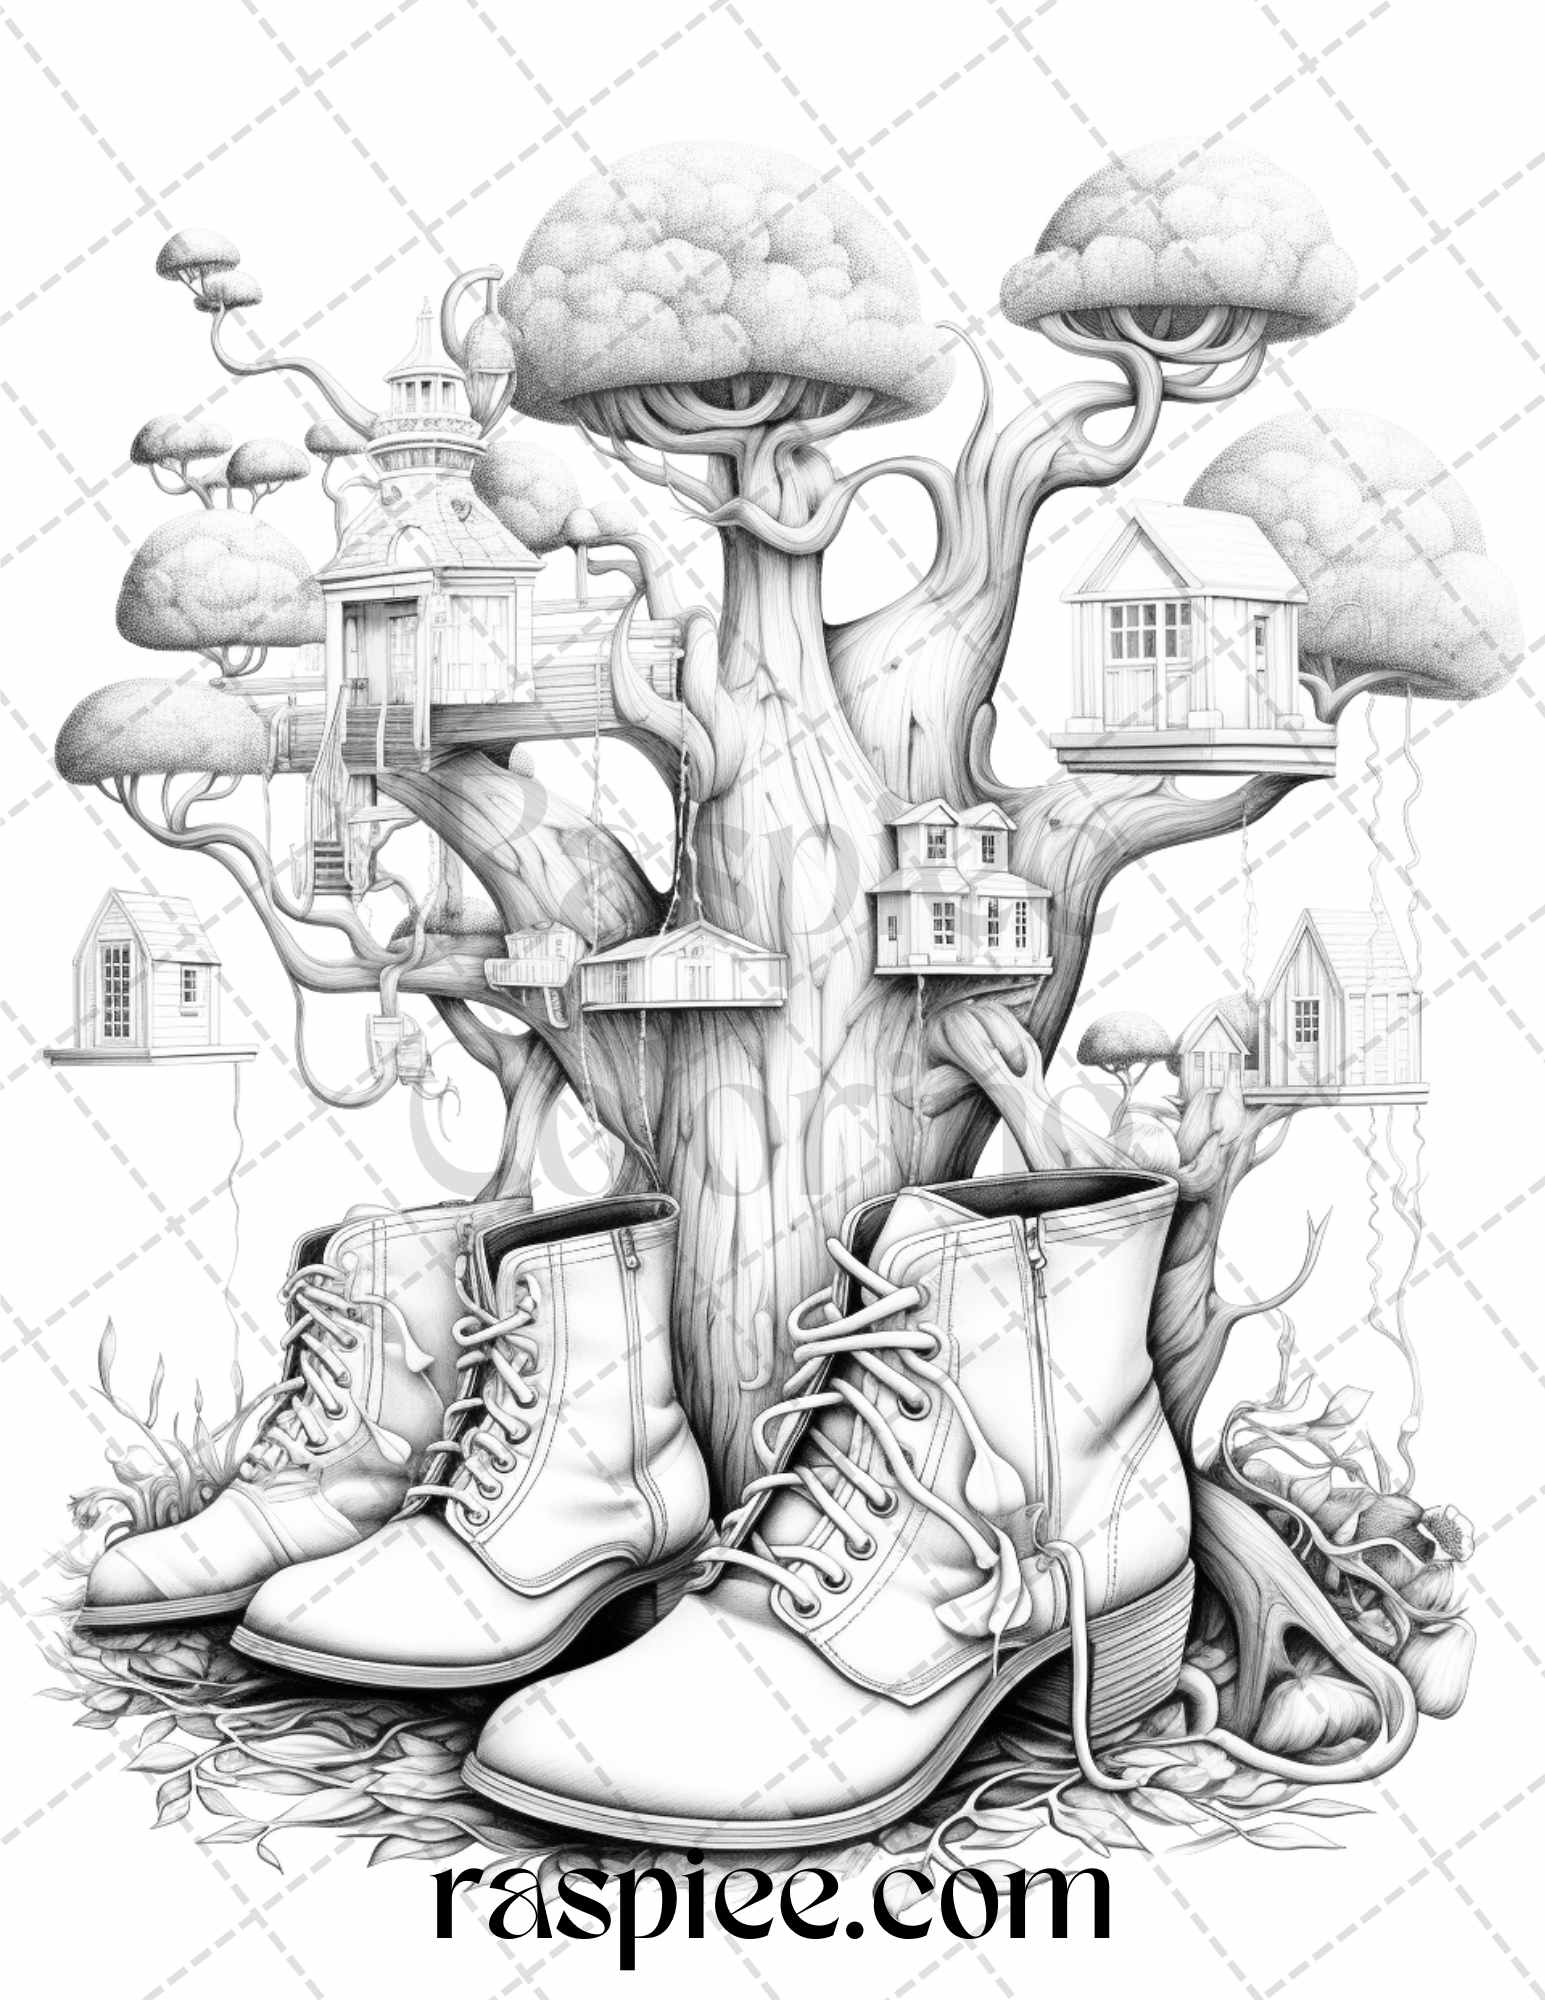 60 Enchanting Surrealism Grayscale Coloring Pages Printable for Adults, PDF File Instant Download - raspiee